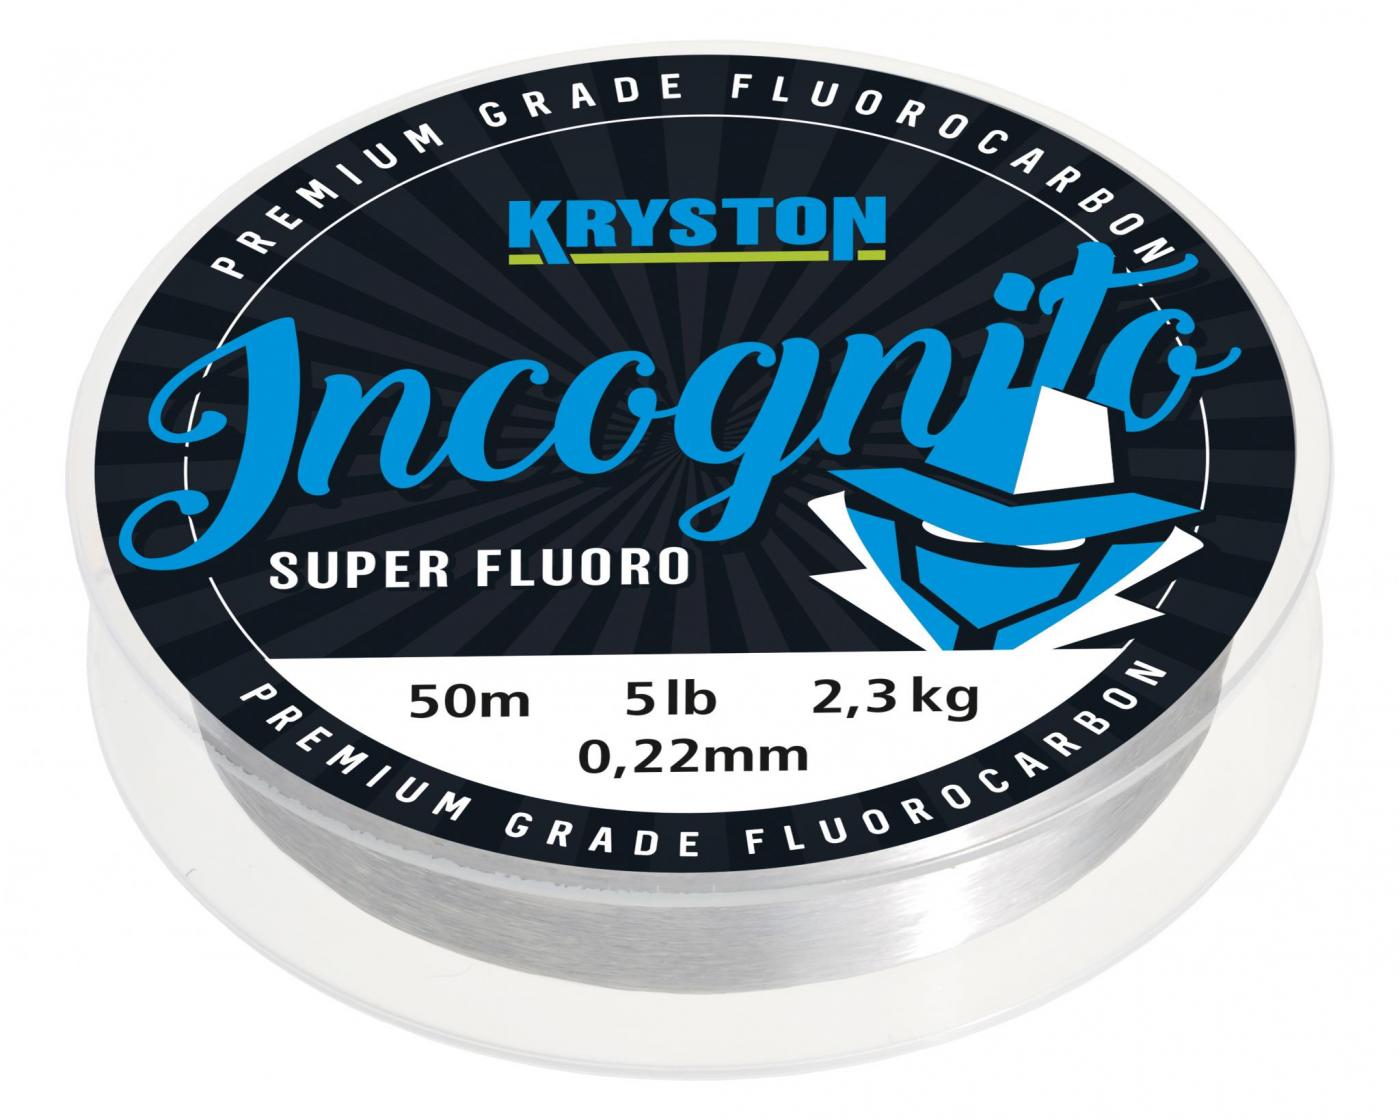 Kryston fluorocarbony - Incognito fluorocarbon 0,38mm 15lb 20m